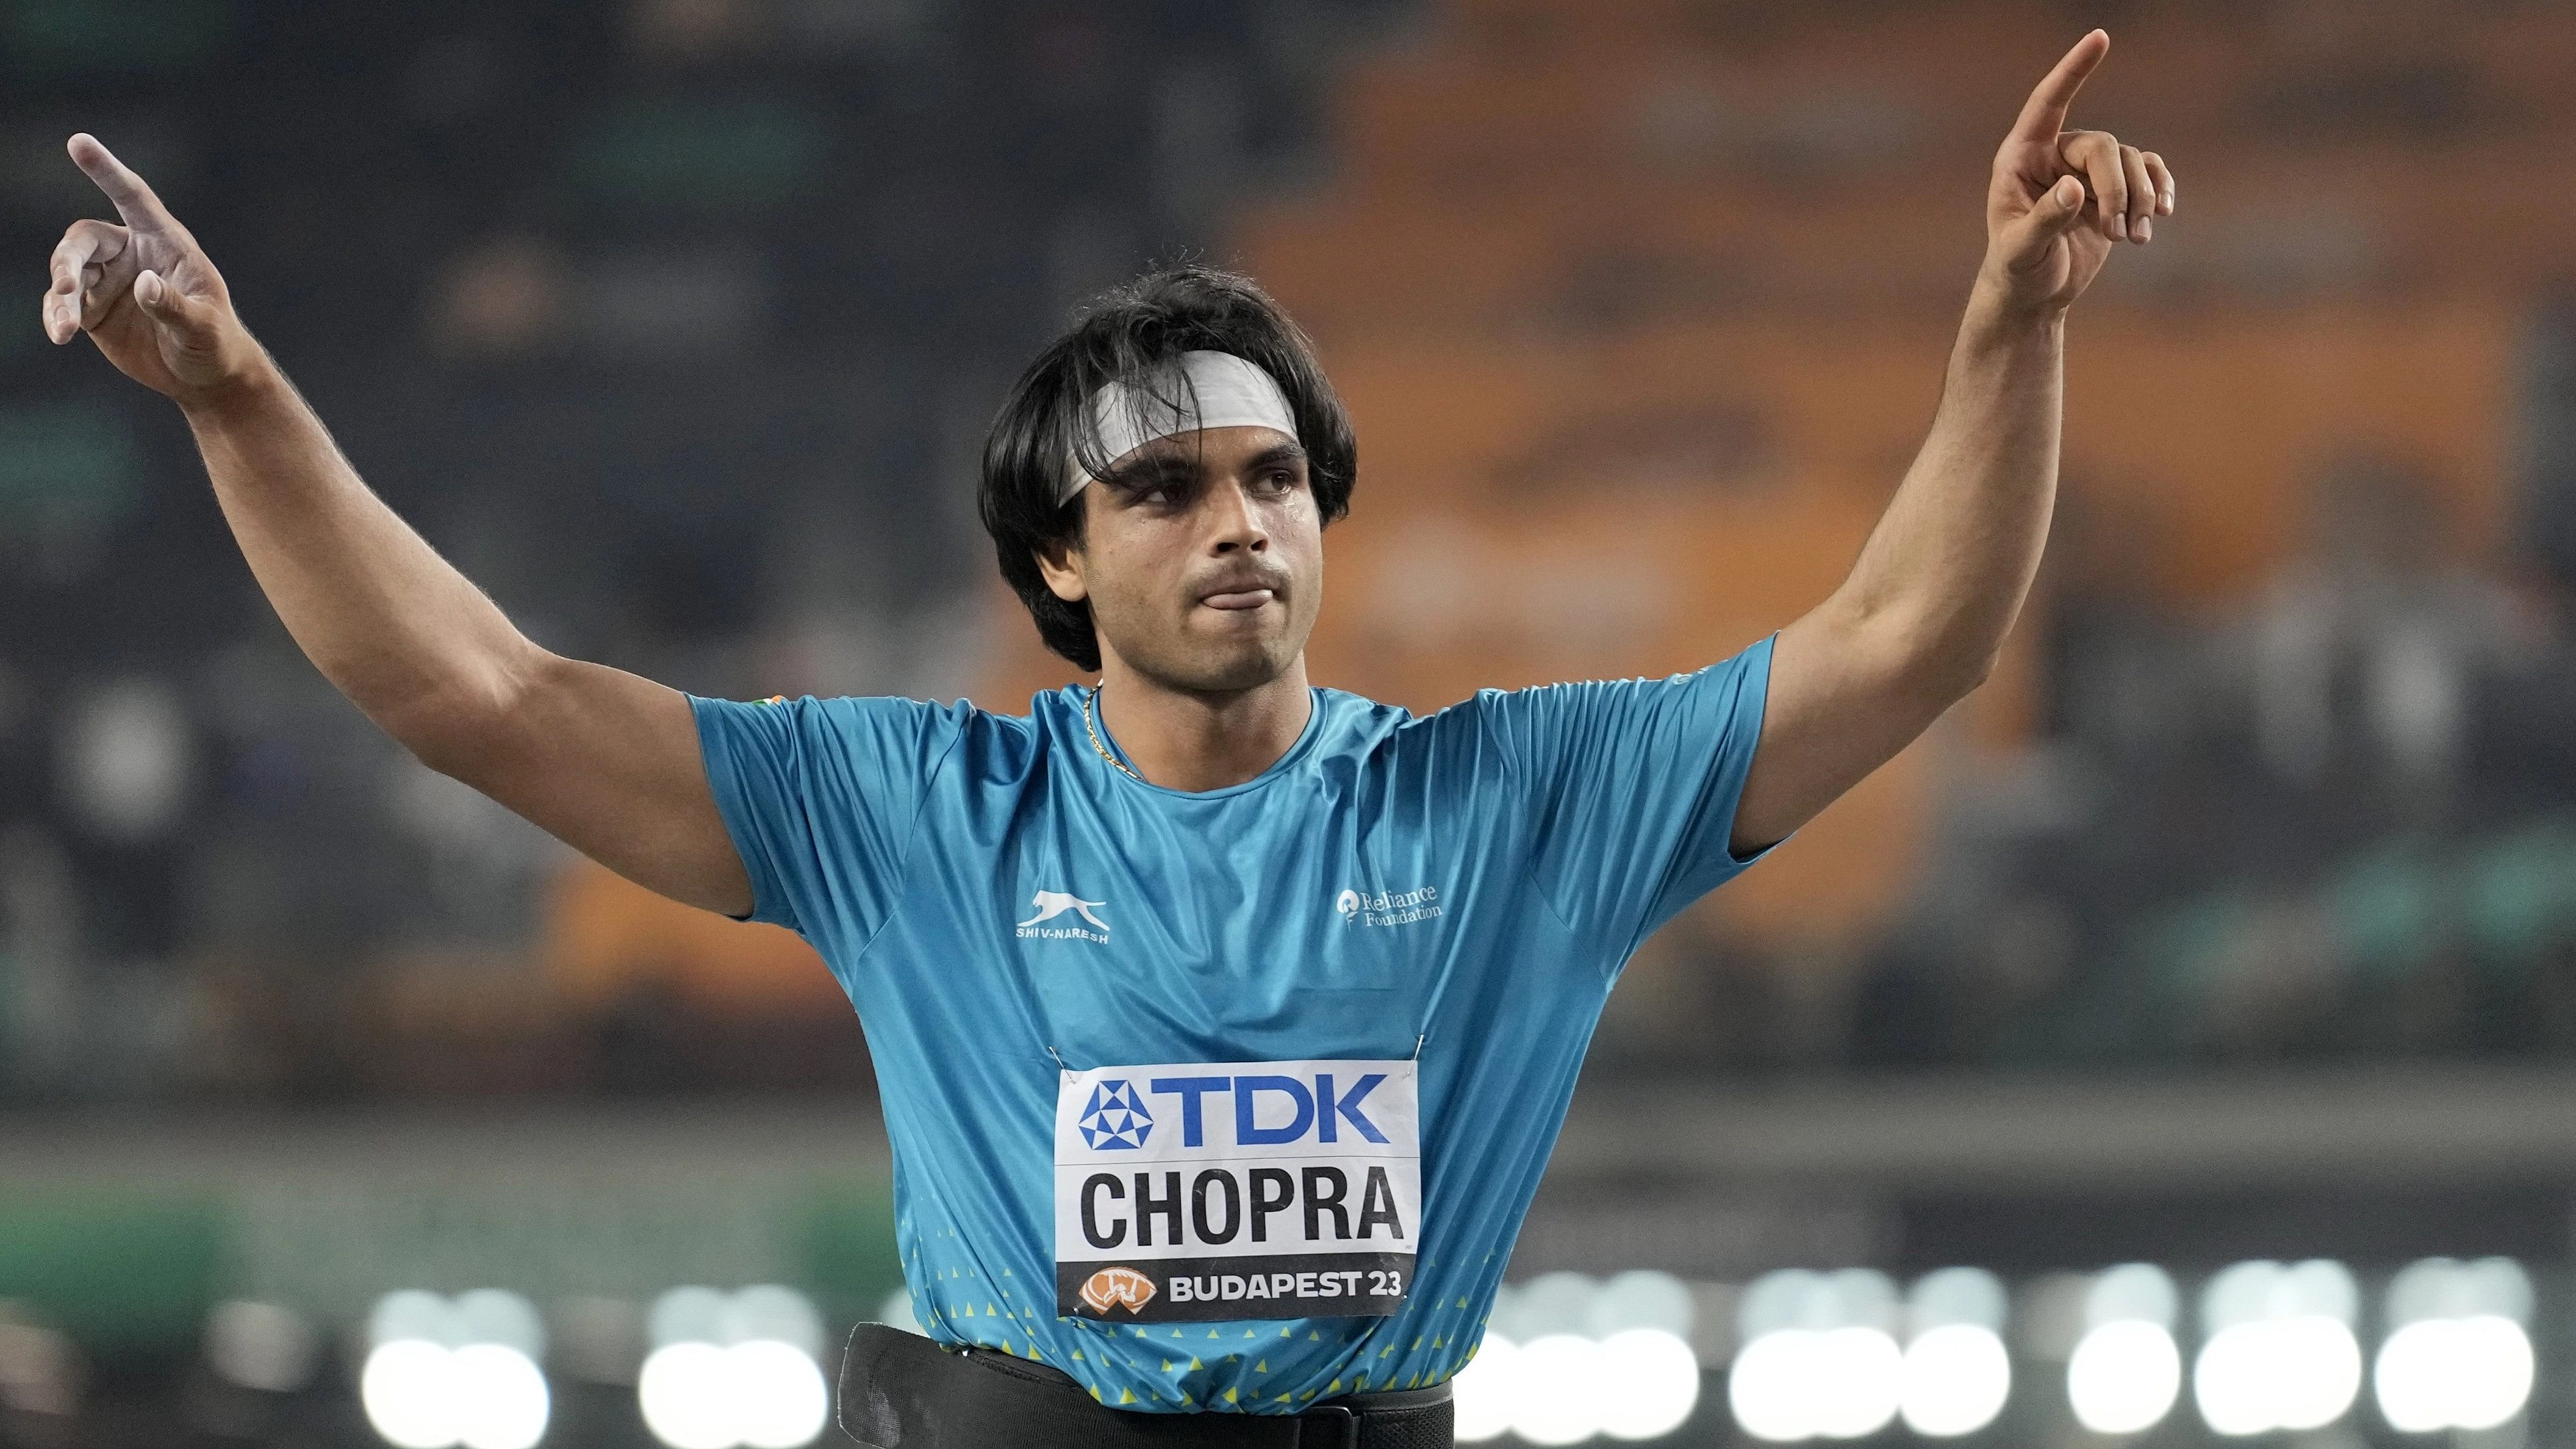 <div class="paragraphs"><p>Neeraj Chopra, of India, reacts after winning the gold medal in the Men's javelin throw final during the World Athletics Championships in Budapest, </p></div>